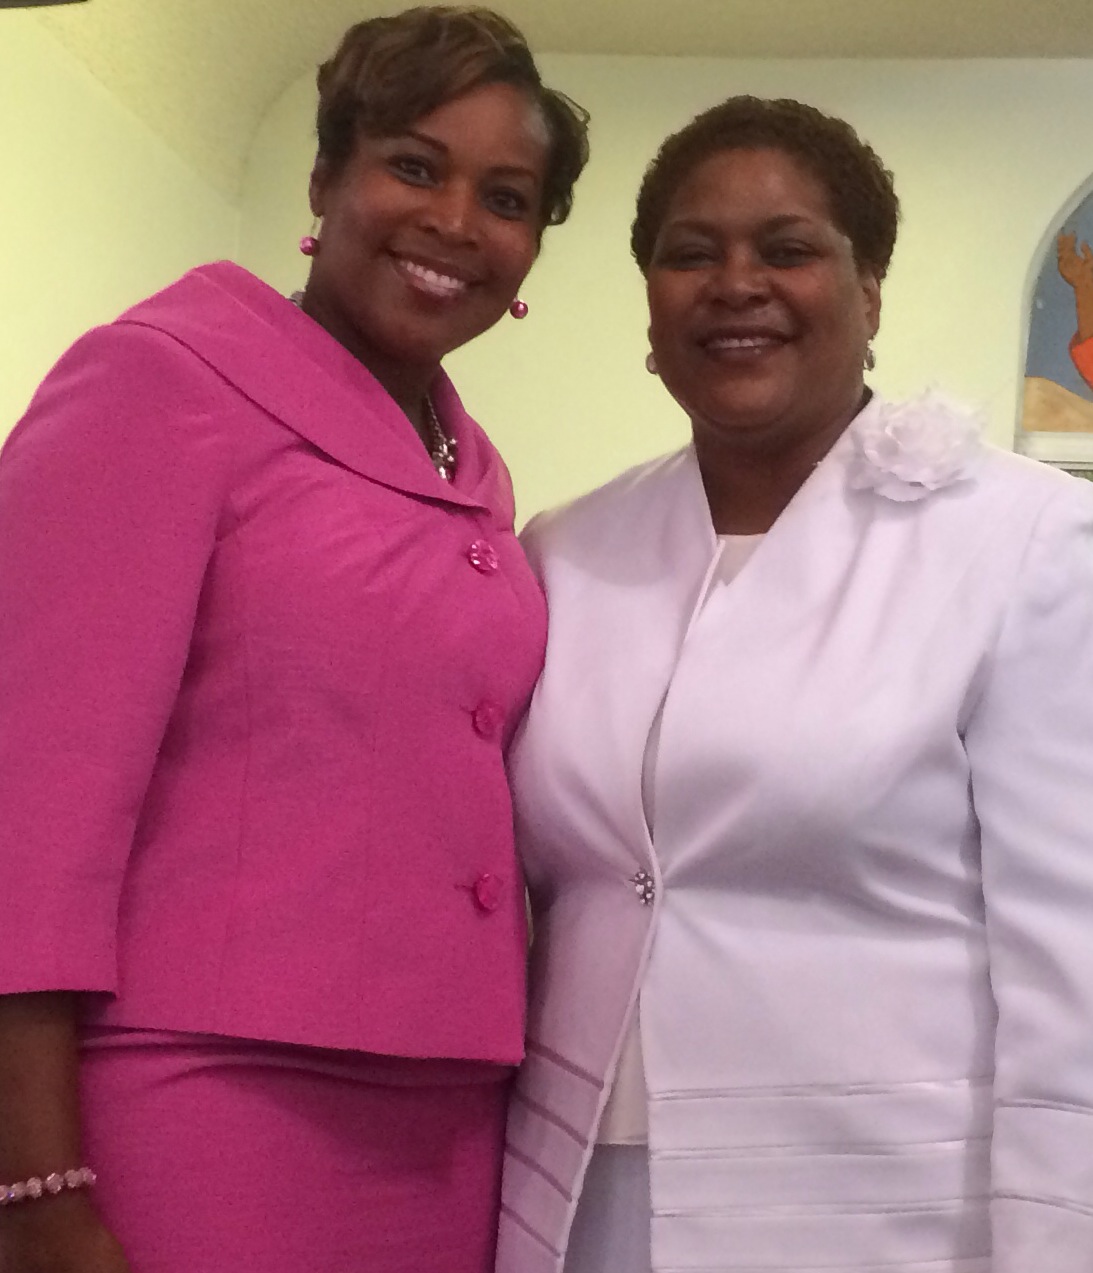 Updates from the Campaign Trail – Felicia M. Brunson for West Park Mayor